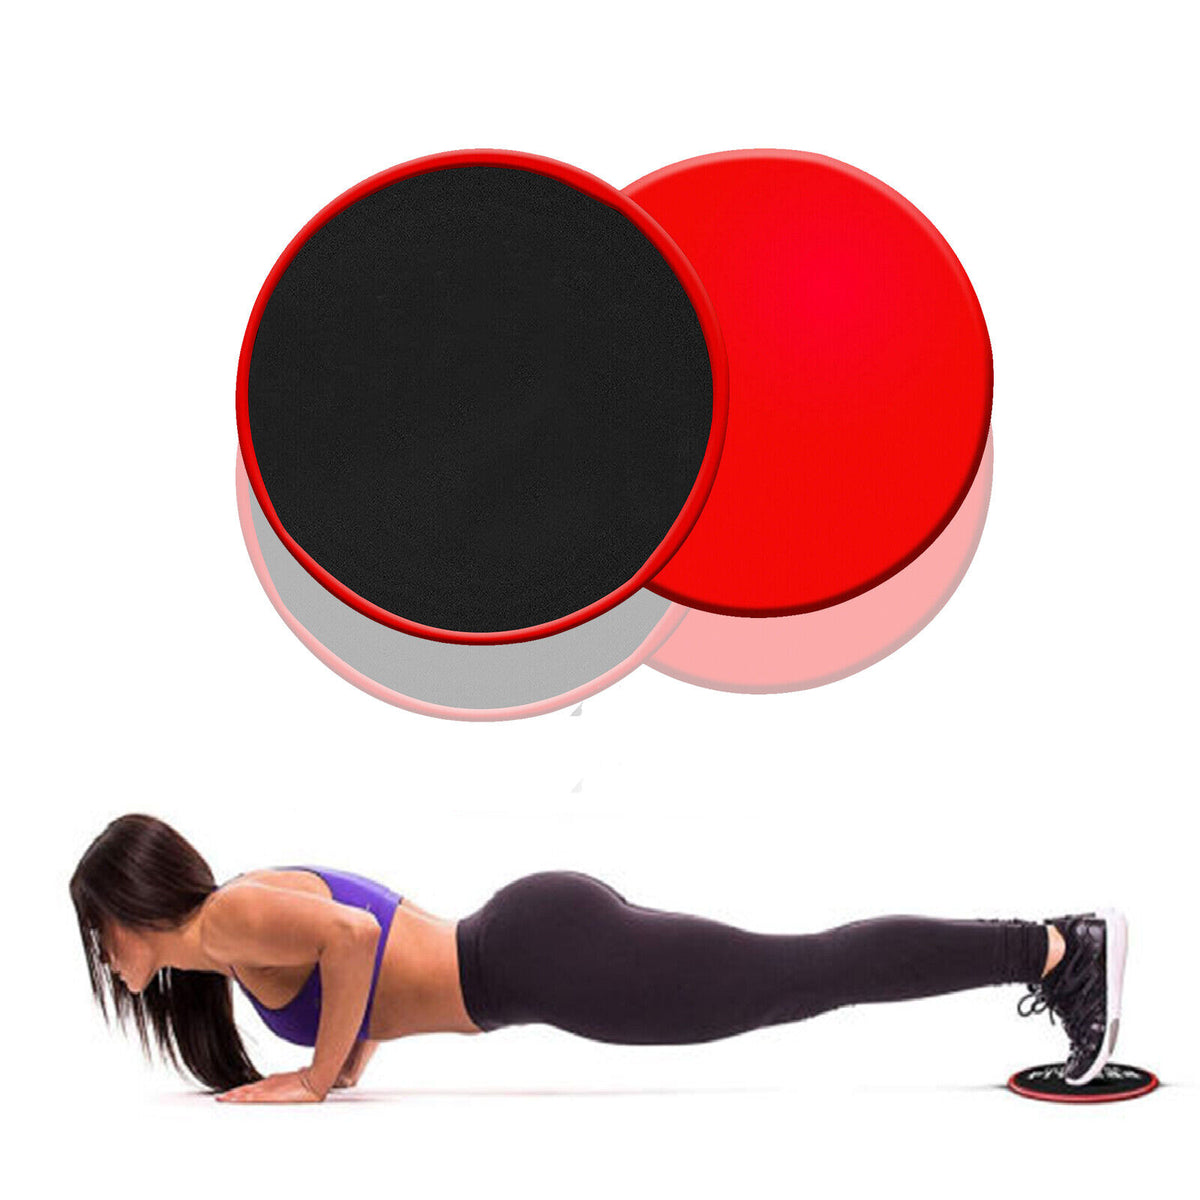 Foot Sliders For Working Out Core Set Of Exercise Sliders Gliders Gliding  Discs Core Sliders For Full Body Exercise On Carpet 